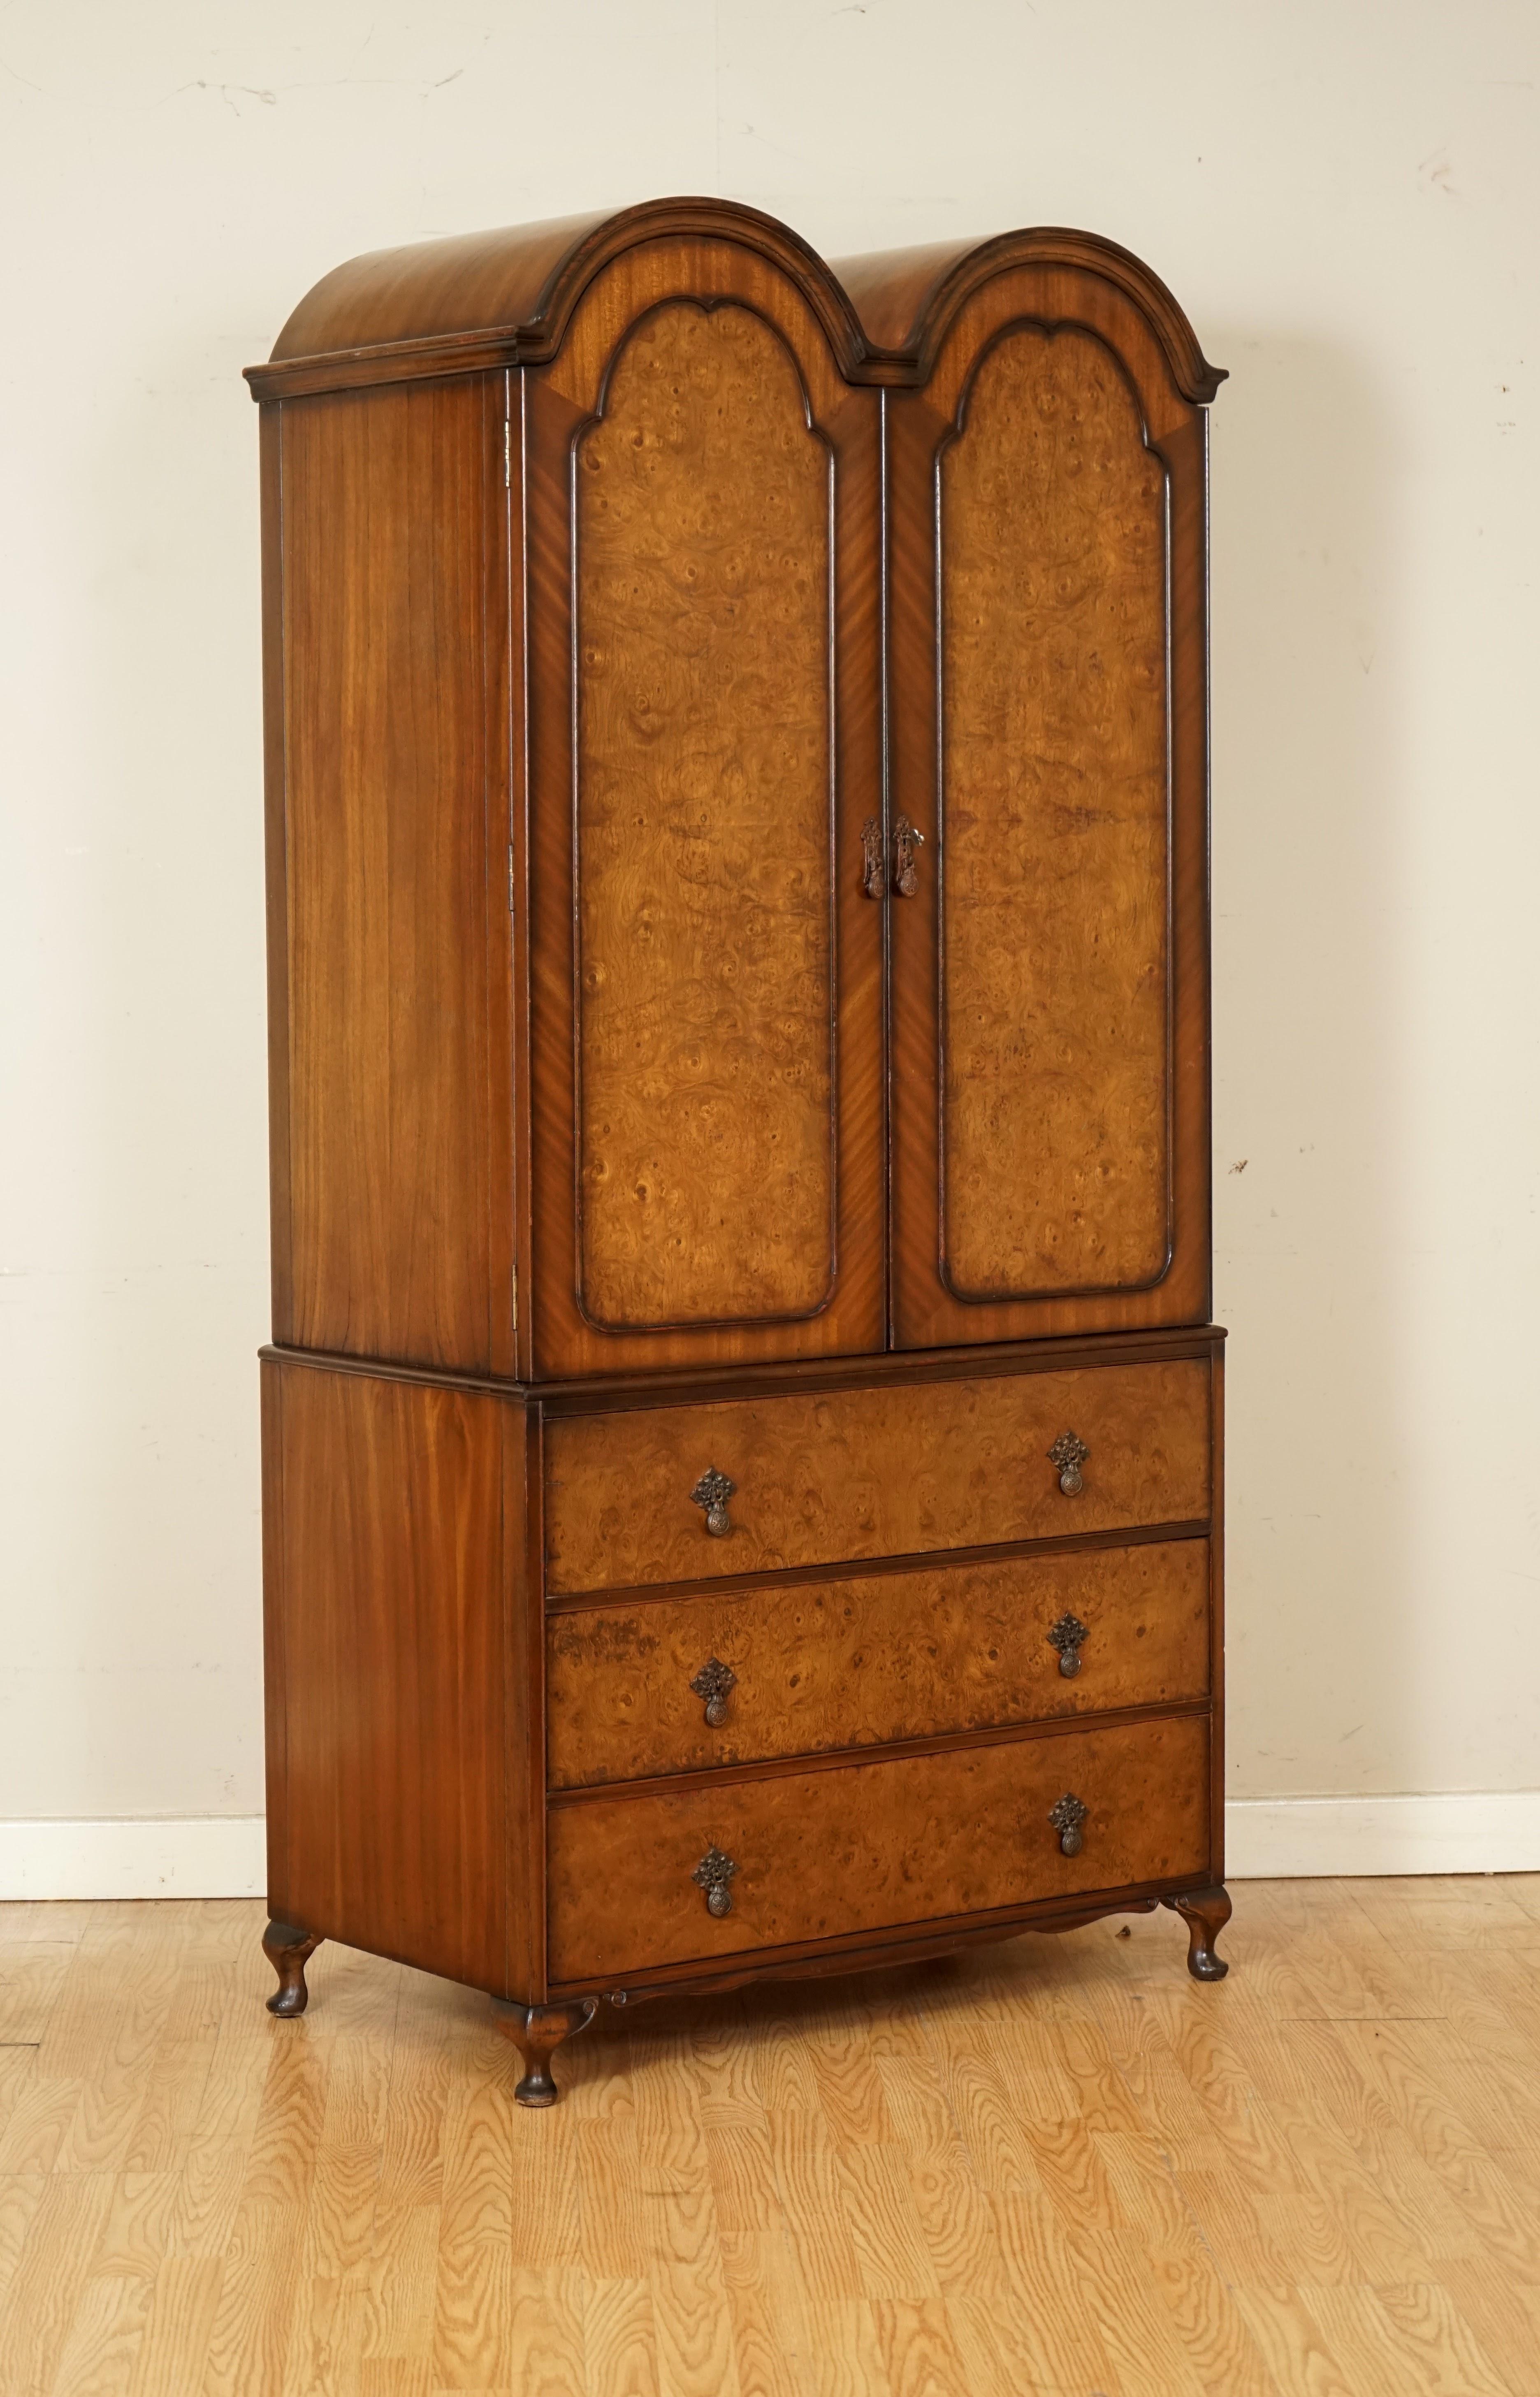 We are so excited to present to you this beautiful Burr walnut Art Deco Double wardrobe.

Inside you will find a rail to hang your clothes, a small shelf on the door with a mirror above it and the drawers below.

A solid and very well made